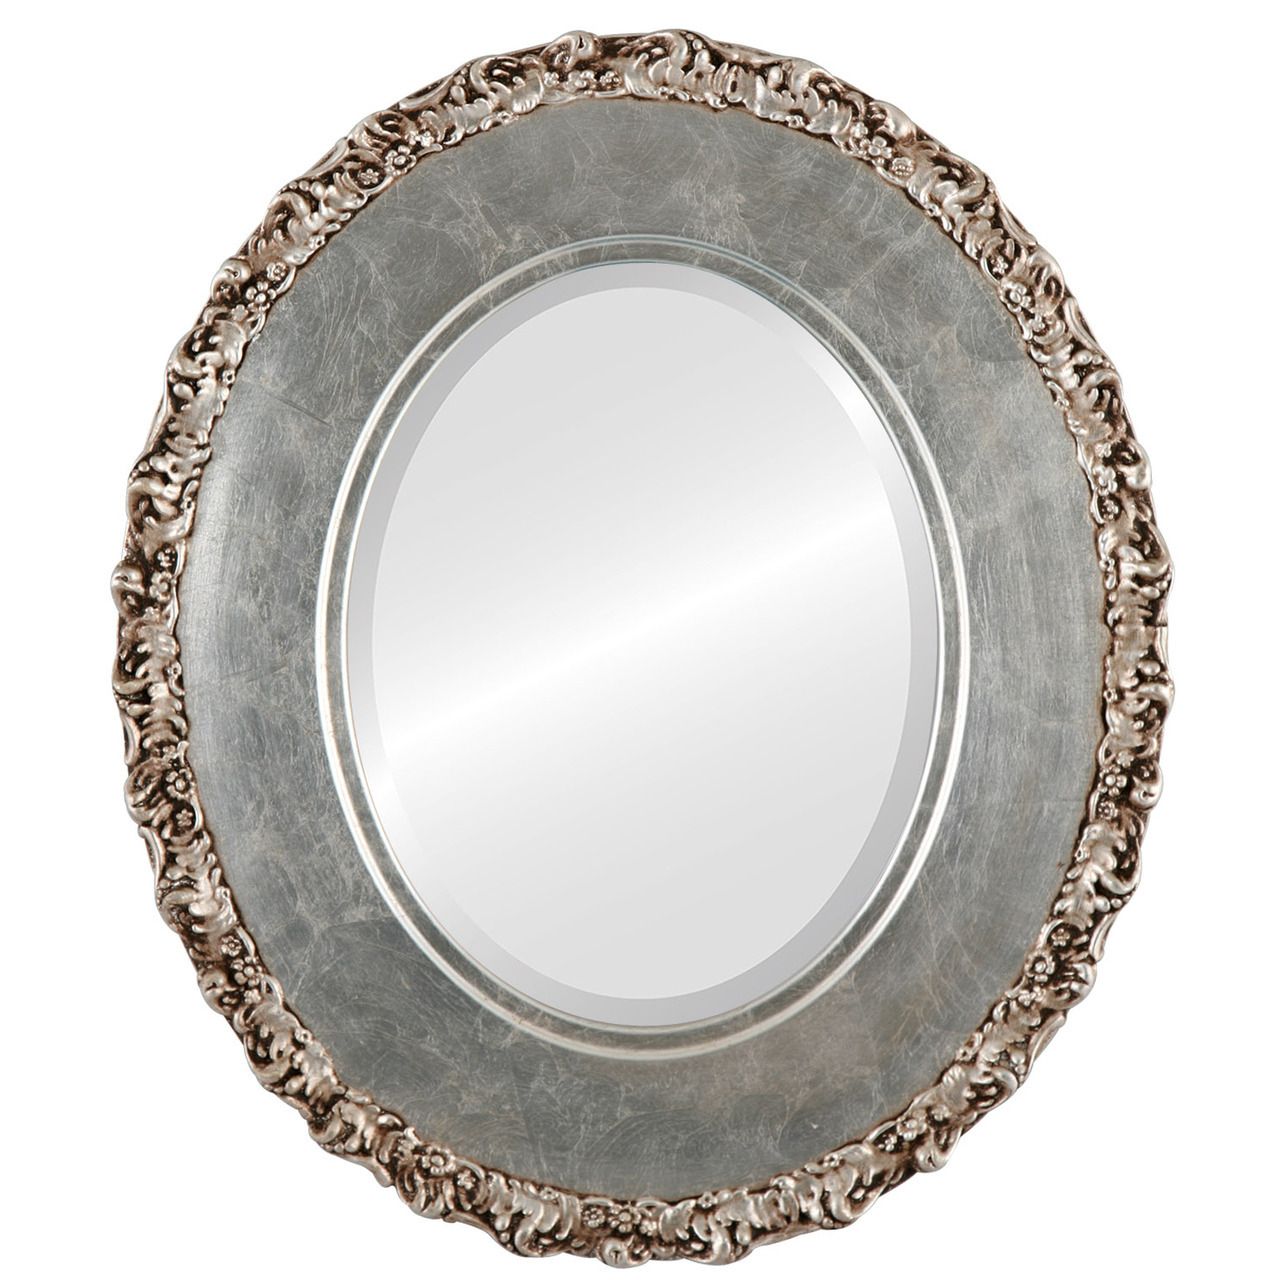 Free Shipping Regarding Most Recent Silver Leaf Round Wall Mirrors (View 5 of 15)